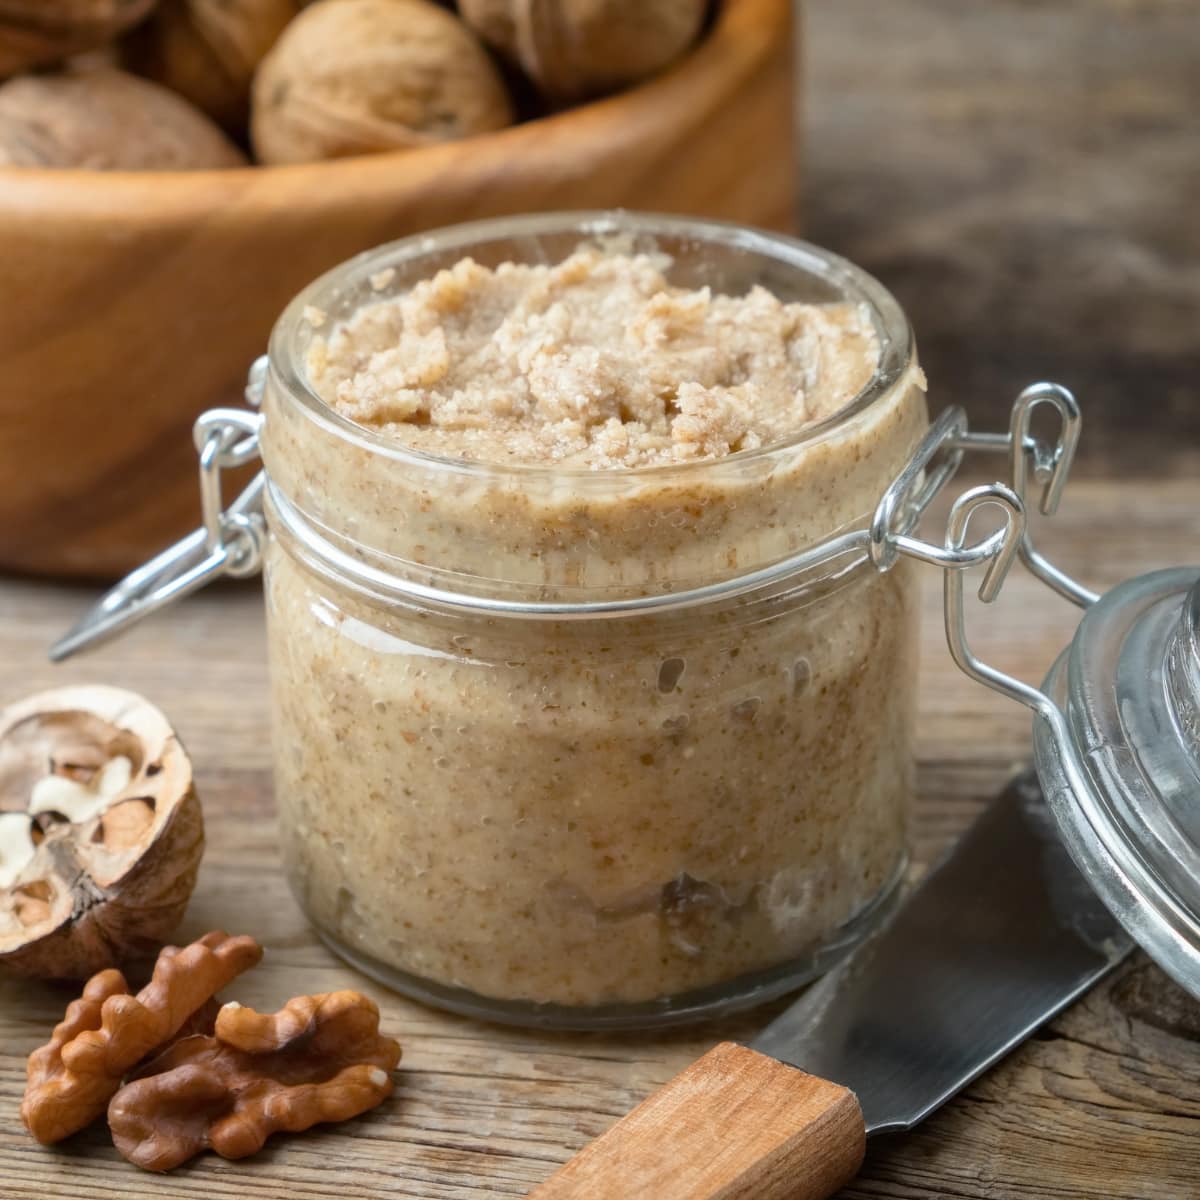 Walnut Butter in a Glass Jar with Nuts on a Wooden Board